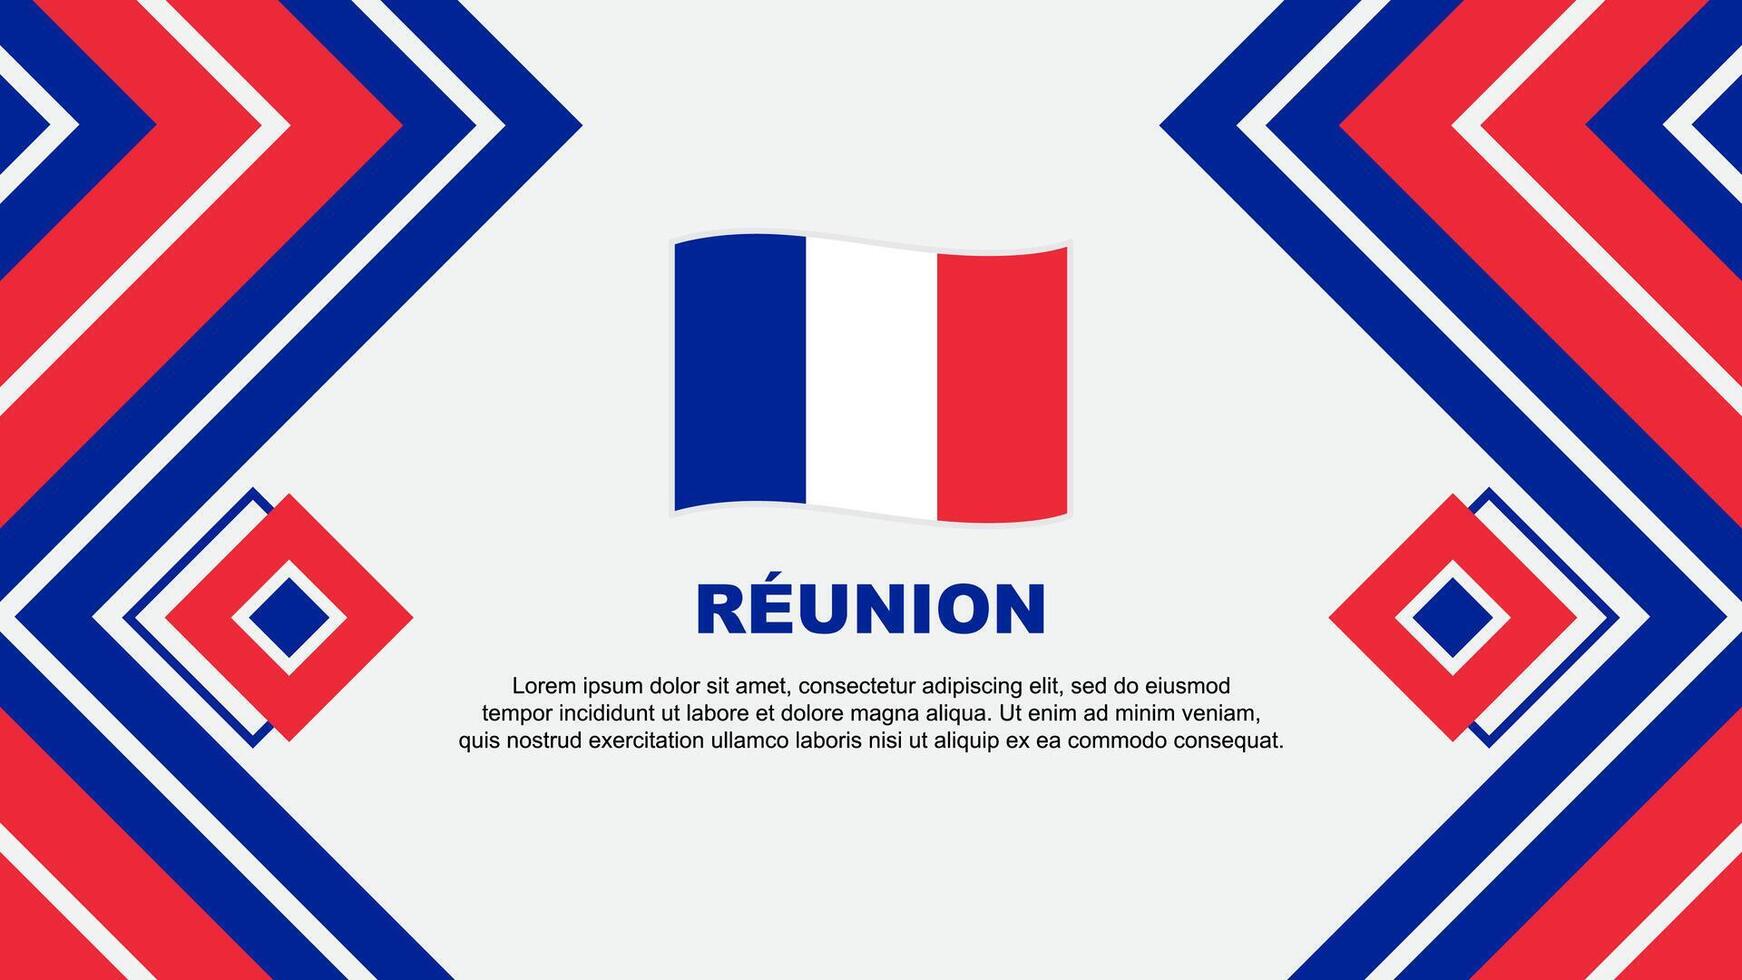 Reunion Flag Abstract Background Design Template. Reunion Independence Day Banner Wallpaper Vector Illustration. Reunion Design